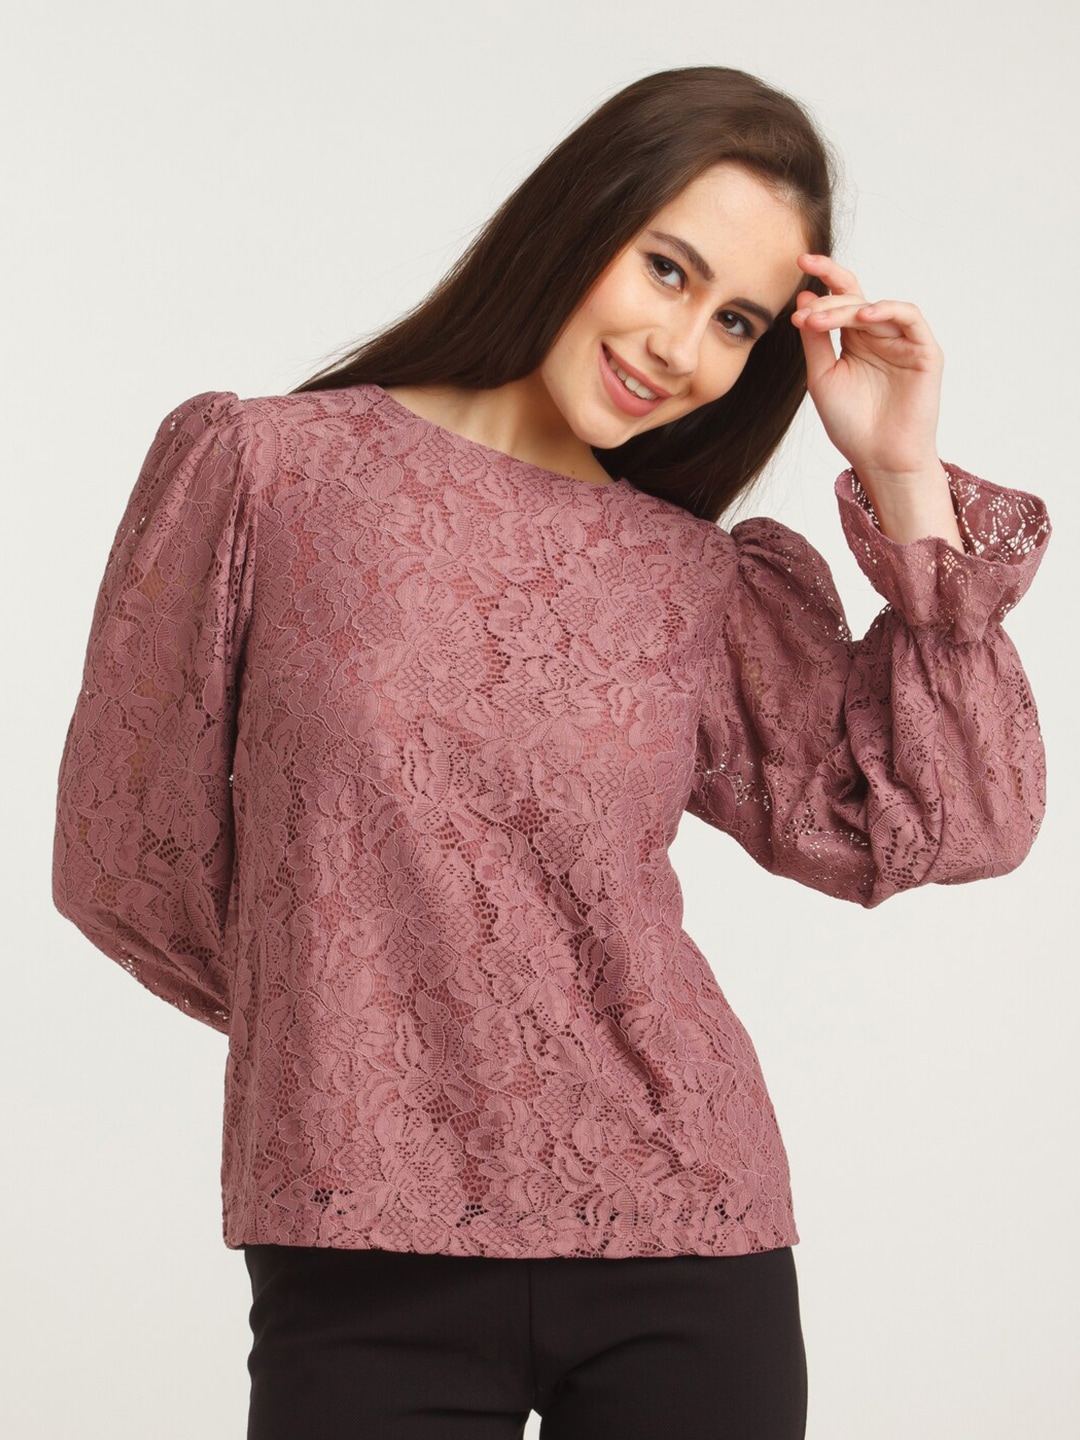 Zink London Women Mauve Floral Lace Insert Top Price in India